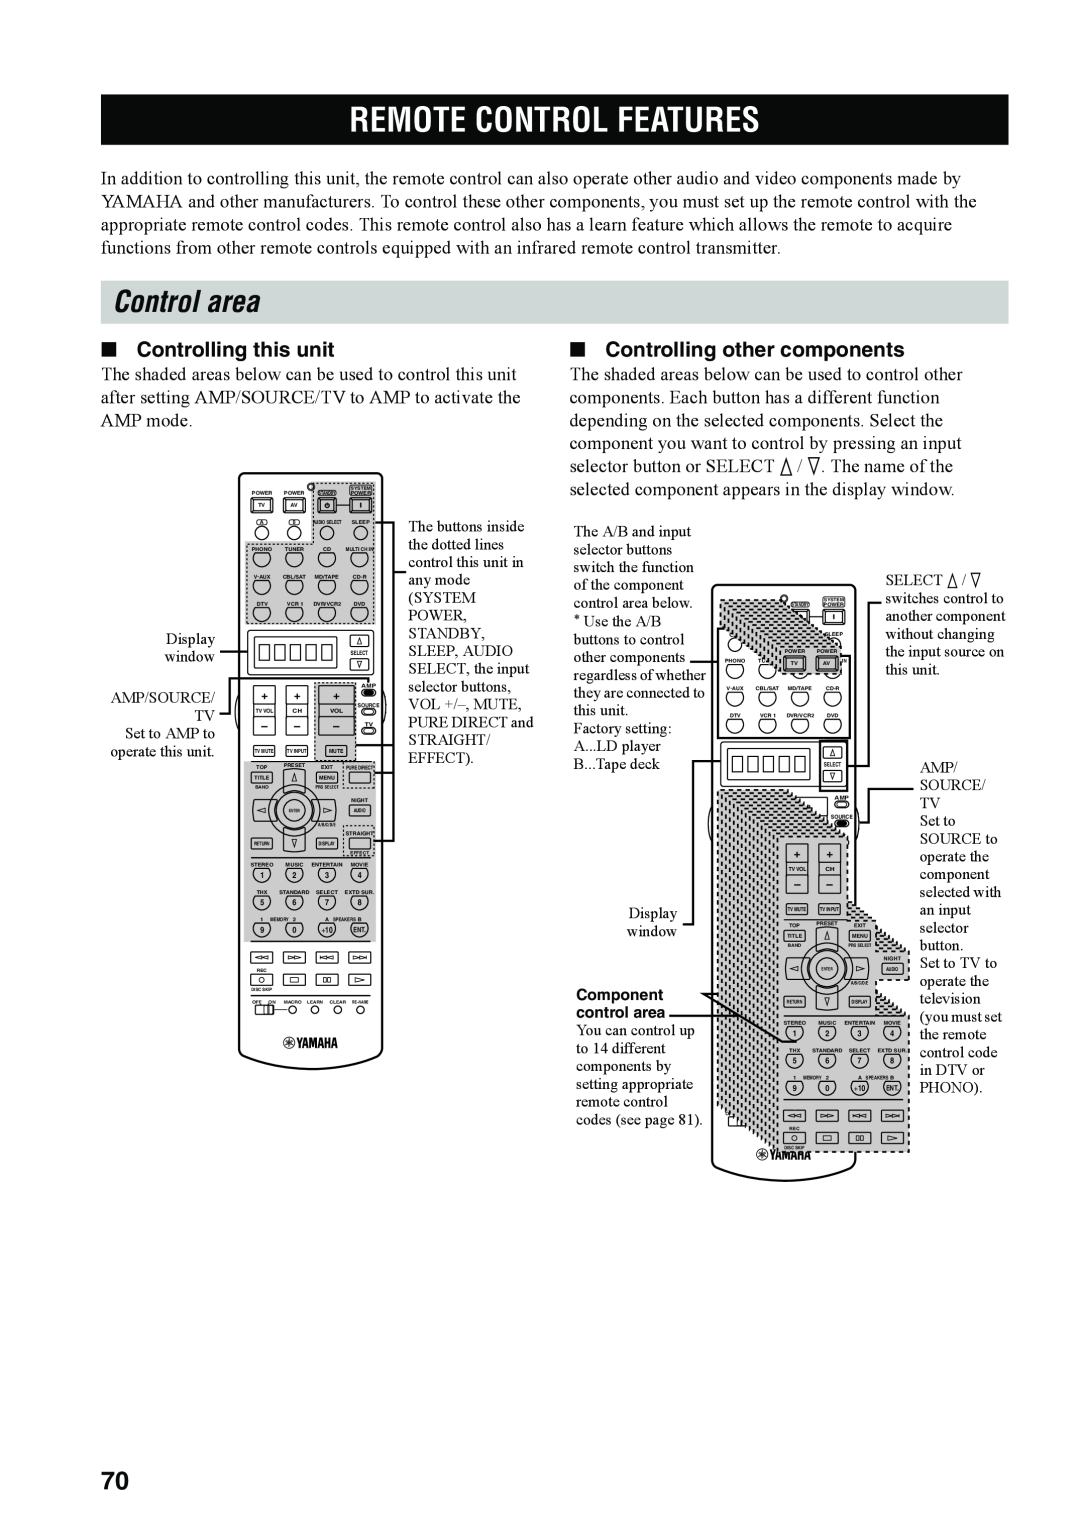 Yamaha RX-V4600 owner manual Remote Control Features, Control area, Controlling this unit, Controlling other components 